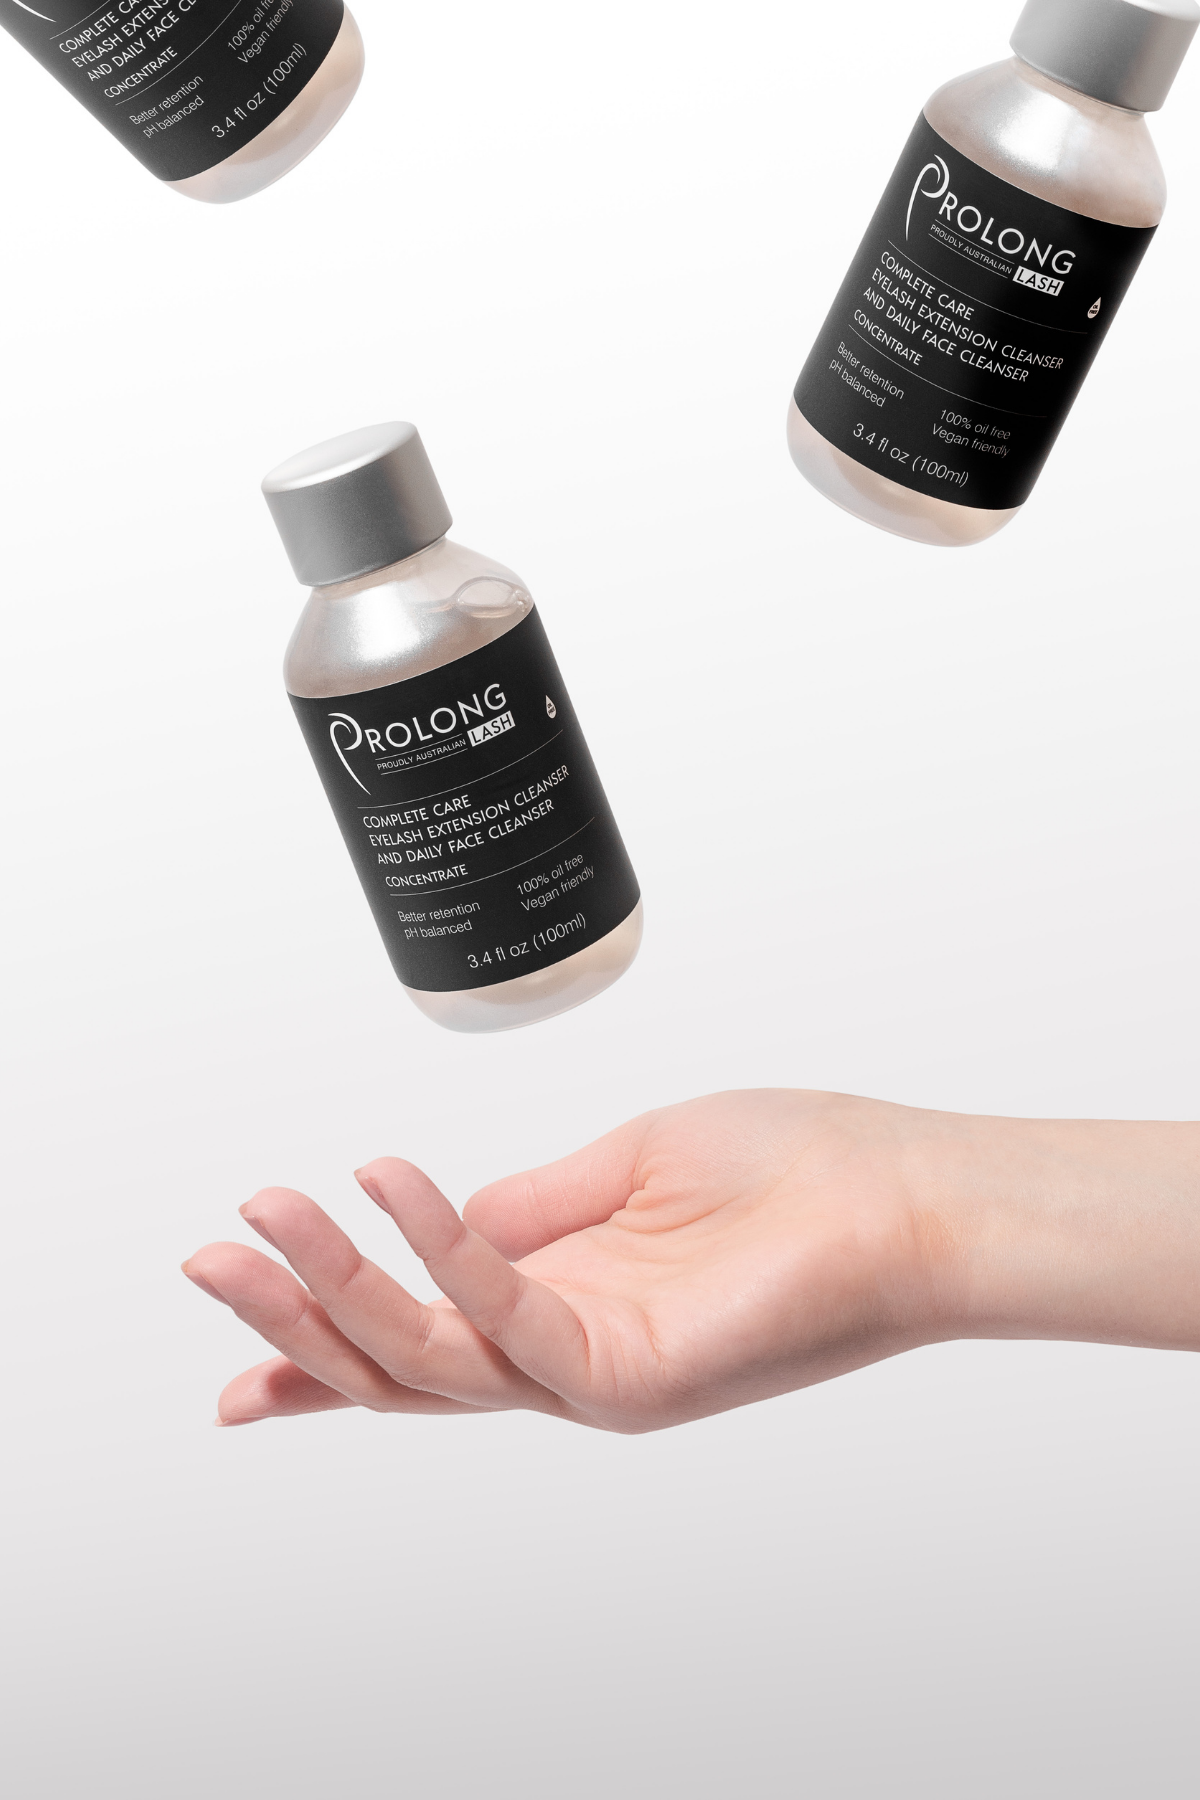 An outstretched hand hovering below three bottles of Prolong Lash Cleanser Concentrate which are floating above. The three bottles are small 100ml sizes plastic bottles with silver lids and black labels.